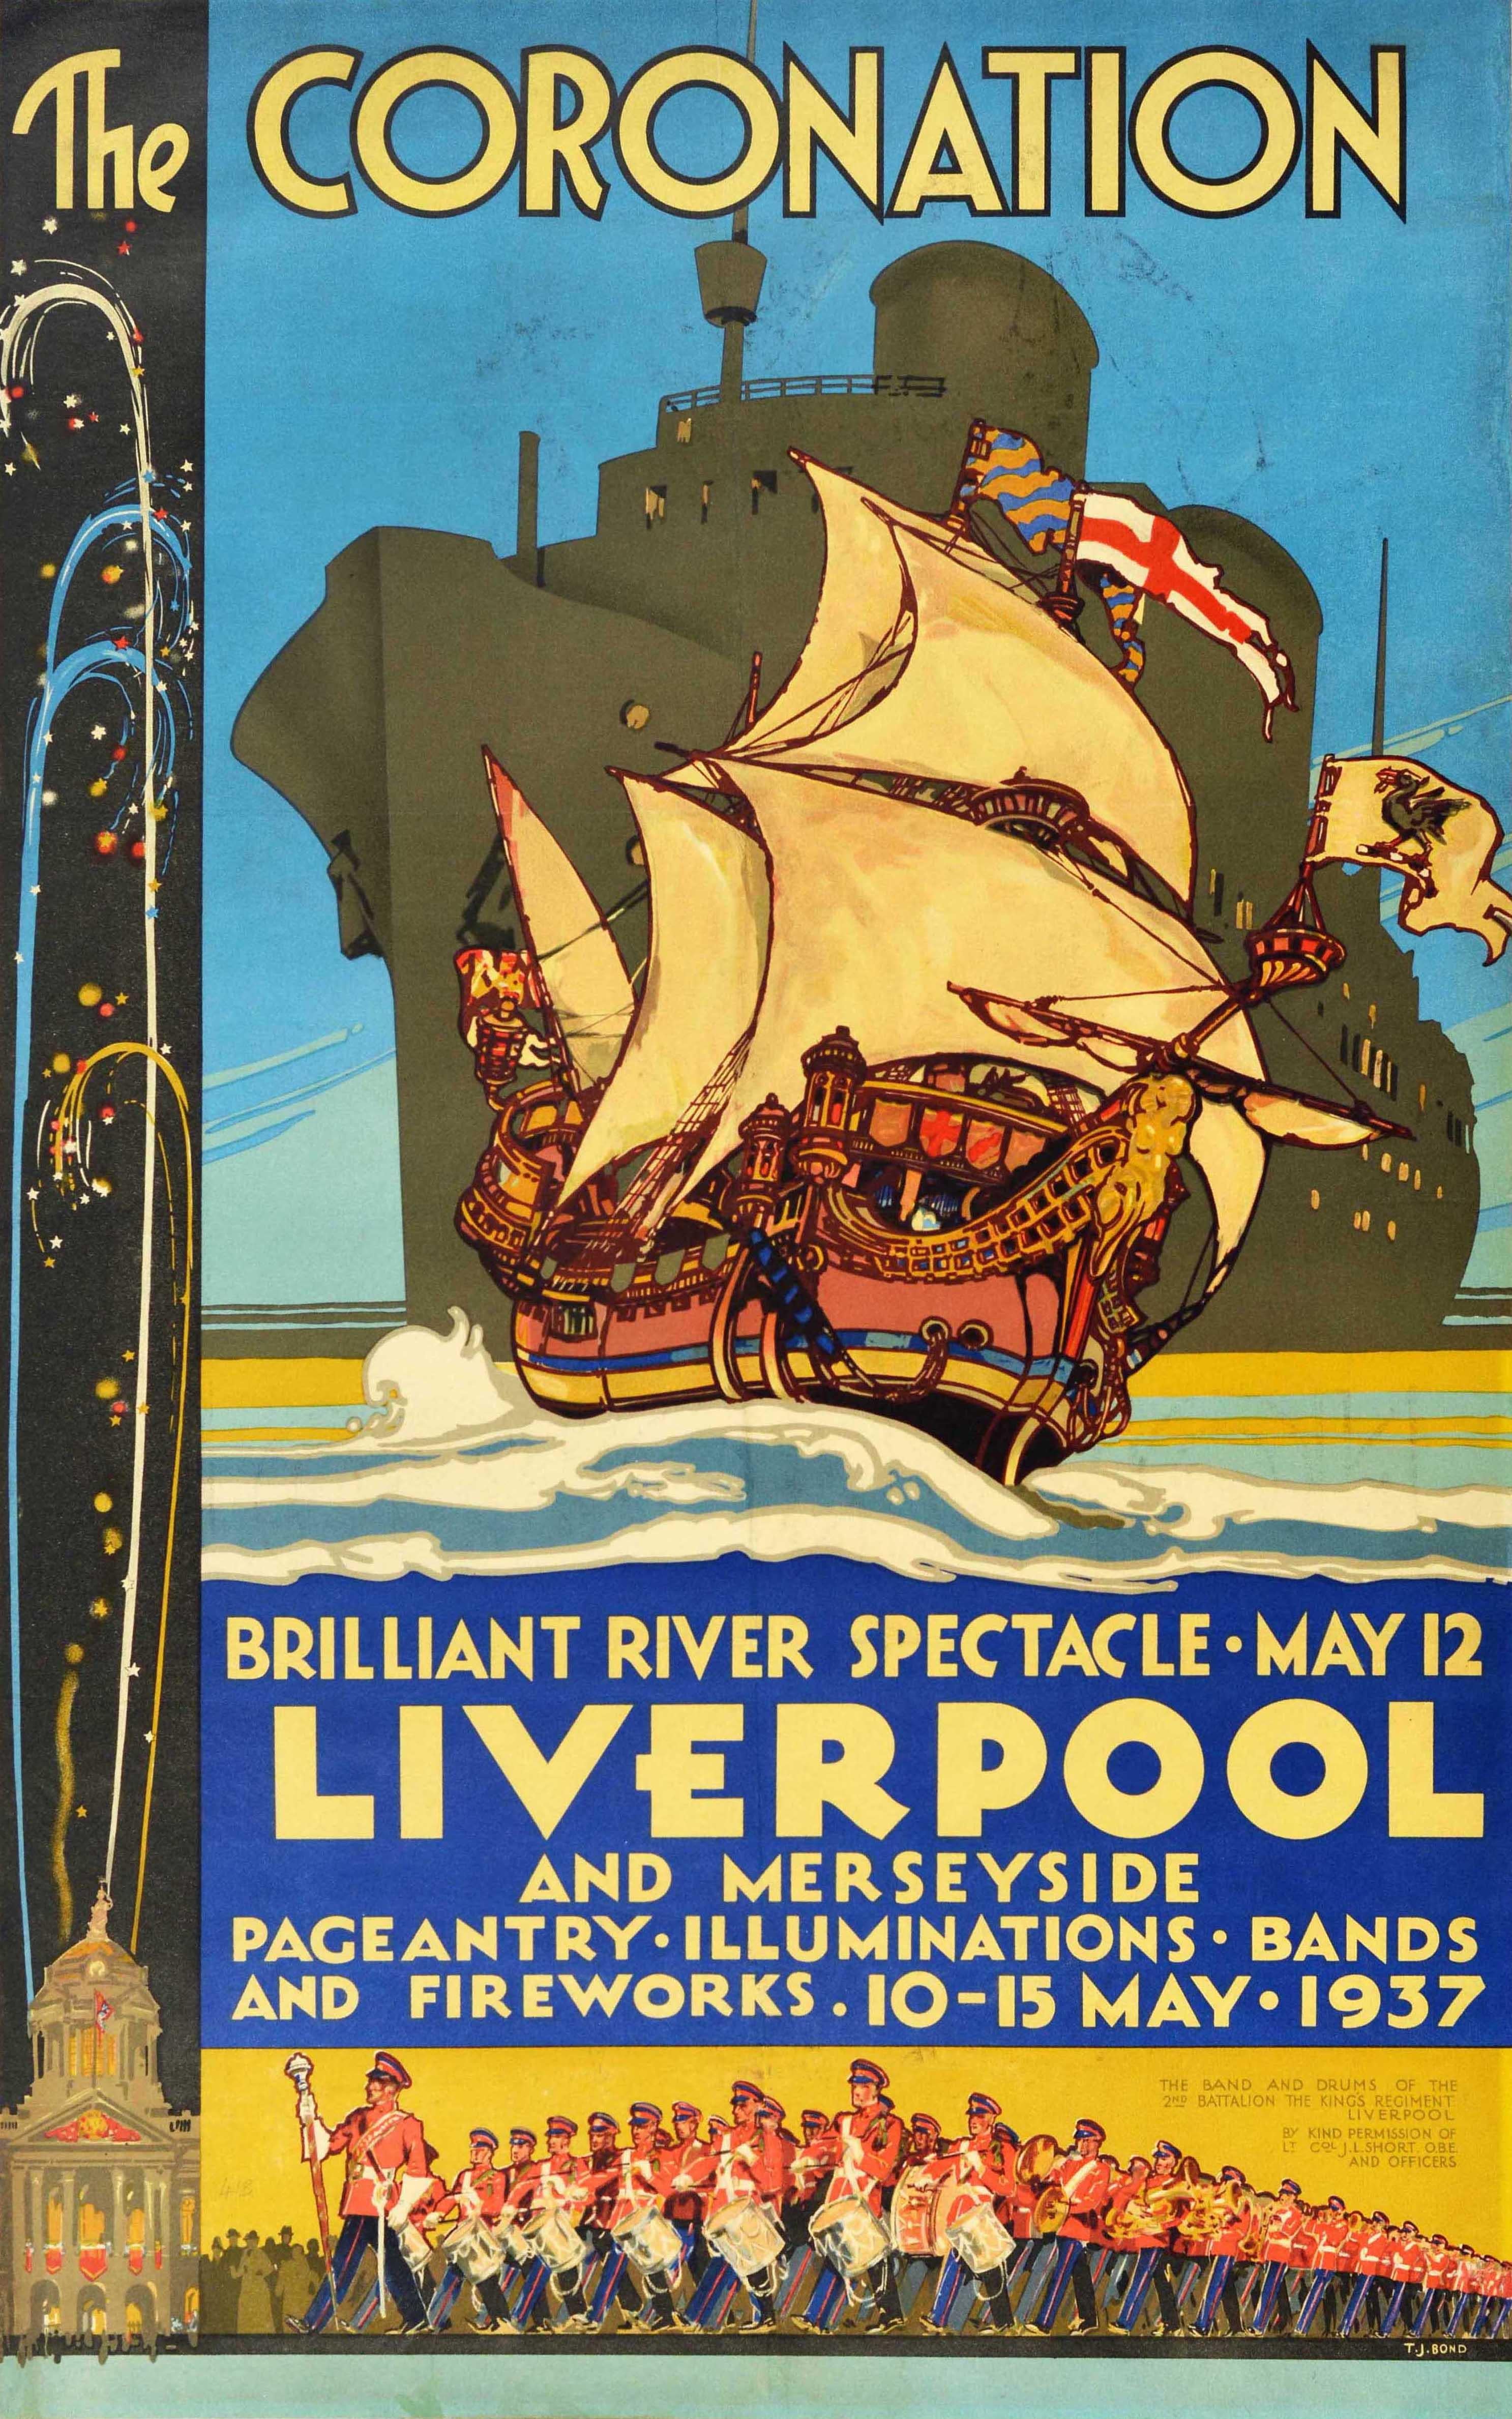 Original vintage poster for the celebrations in Liverpool of the coronation of King George VI and Elizabeth that took place at Westminster Abbey London on 12 May 1937. Colourful design depicting an historic tall ship in full sail in front of a